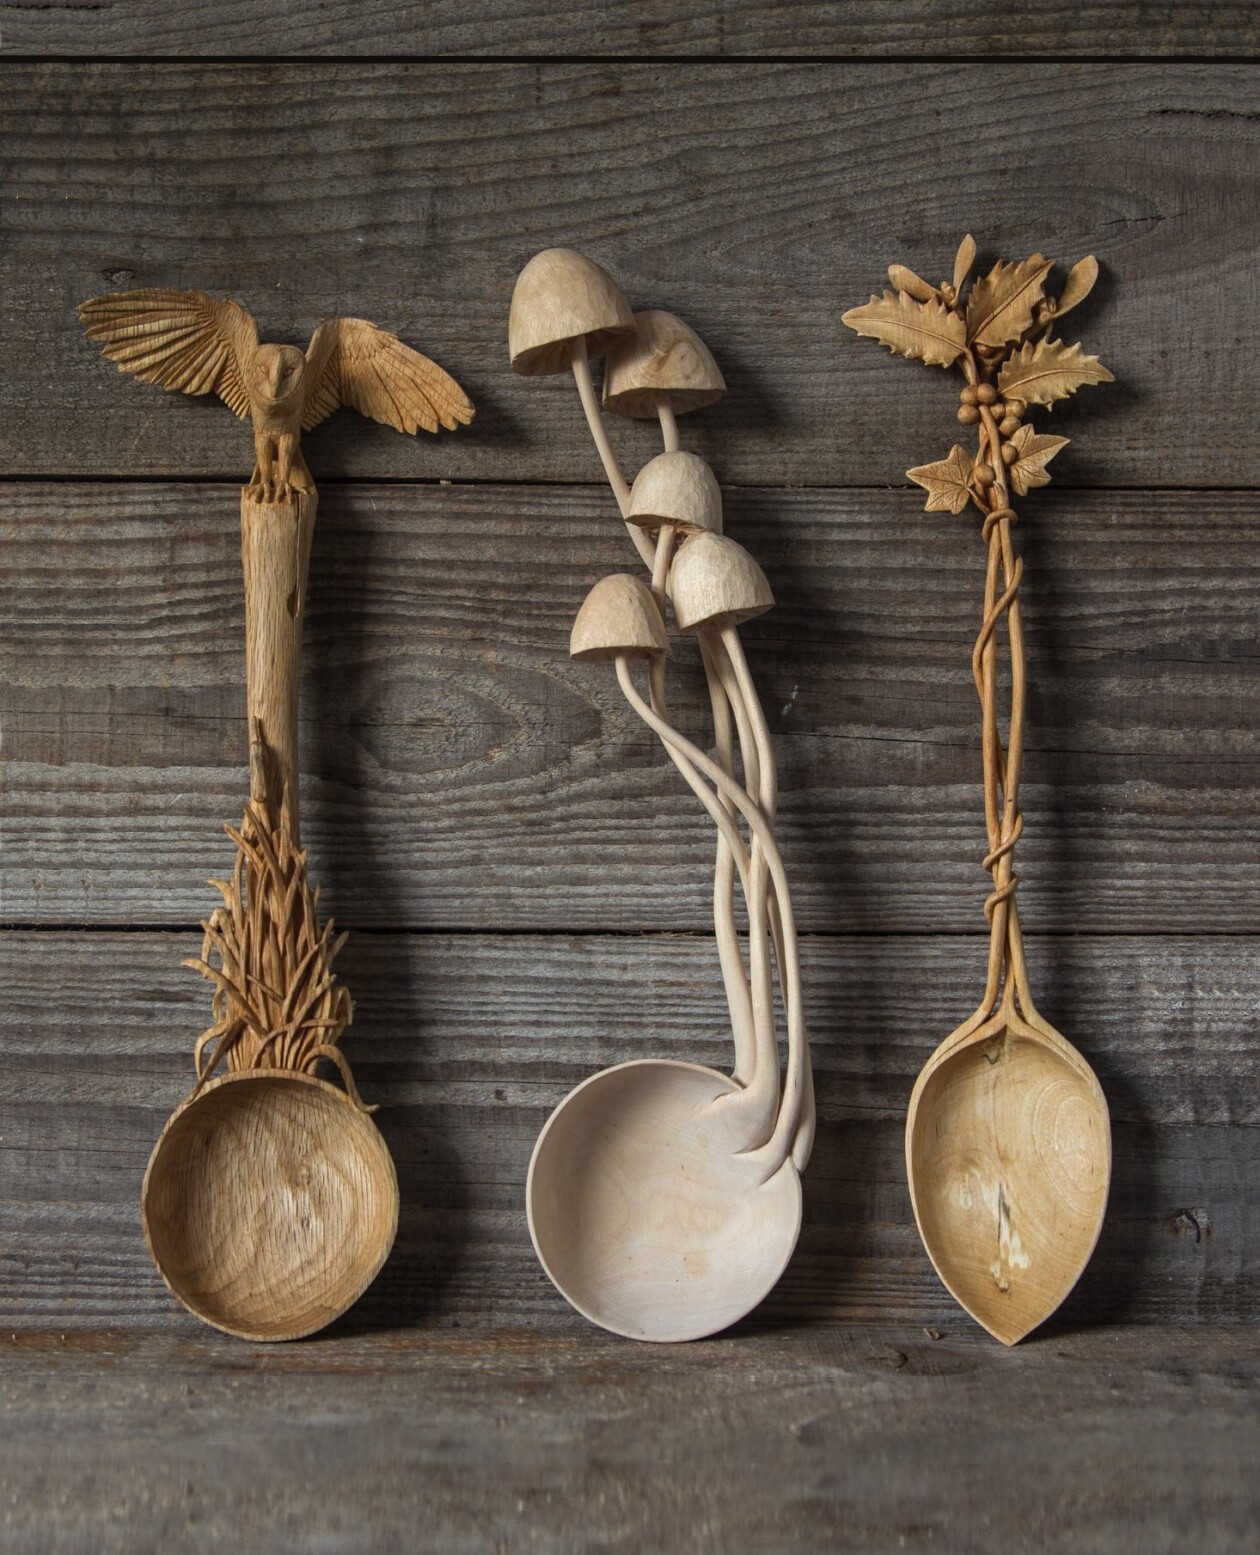 Hand Carved Wood Spoons By Giles Newman